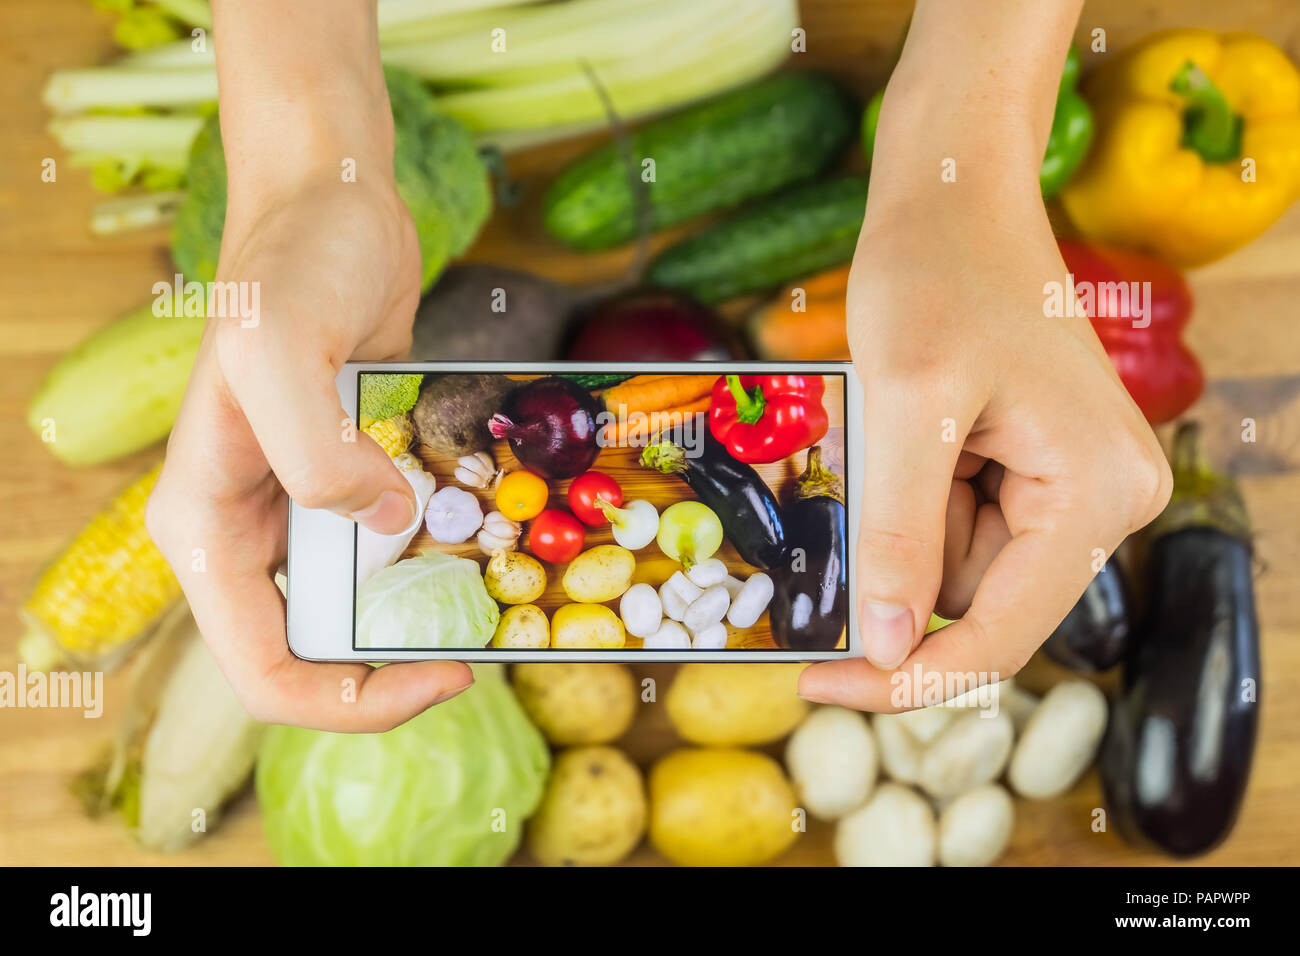 Taking photo of fresh organic vegetables on rustic wood table, top view. Close-up of female hands photographing flat lay of locally grown natural vega Stock Photo